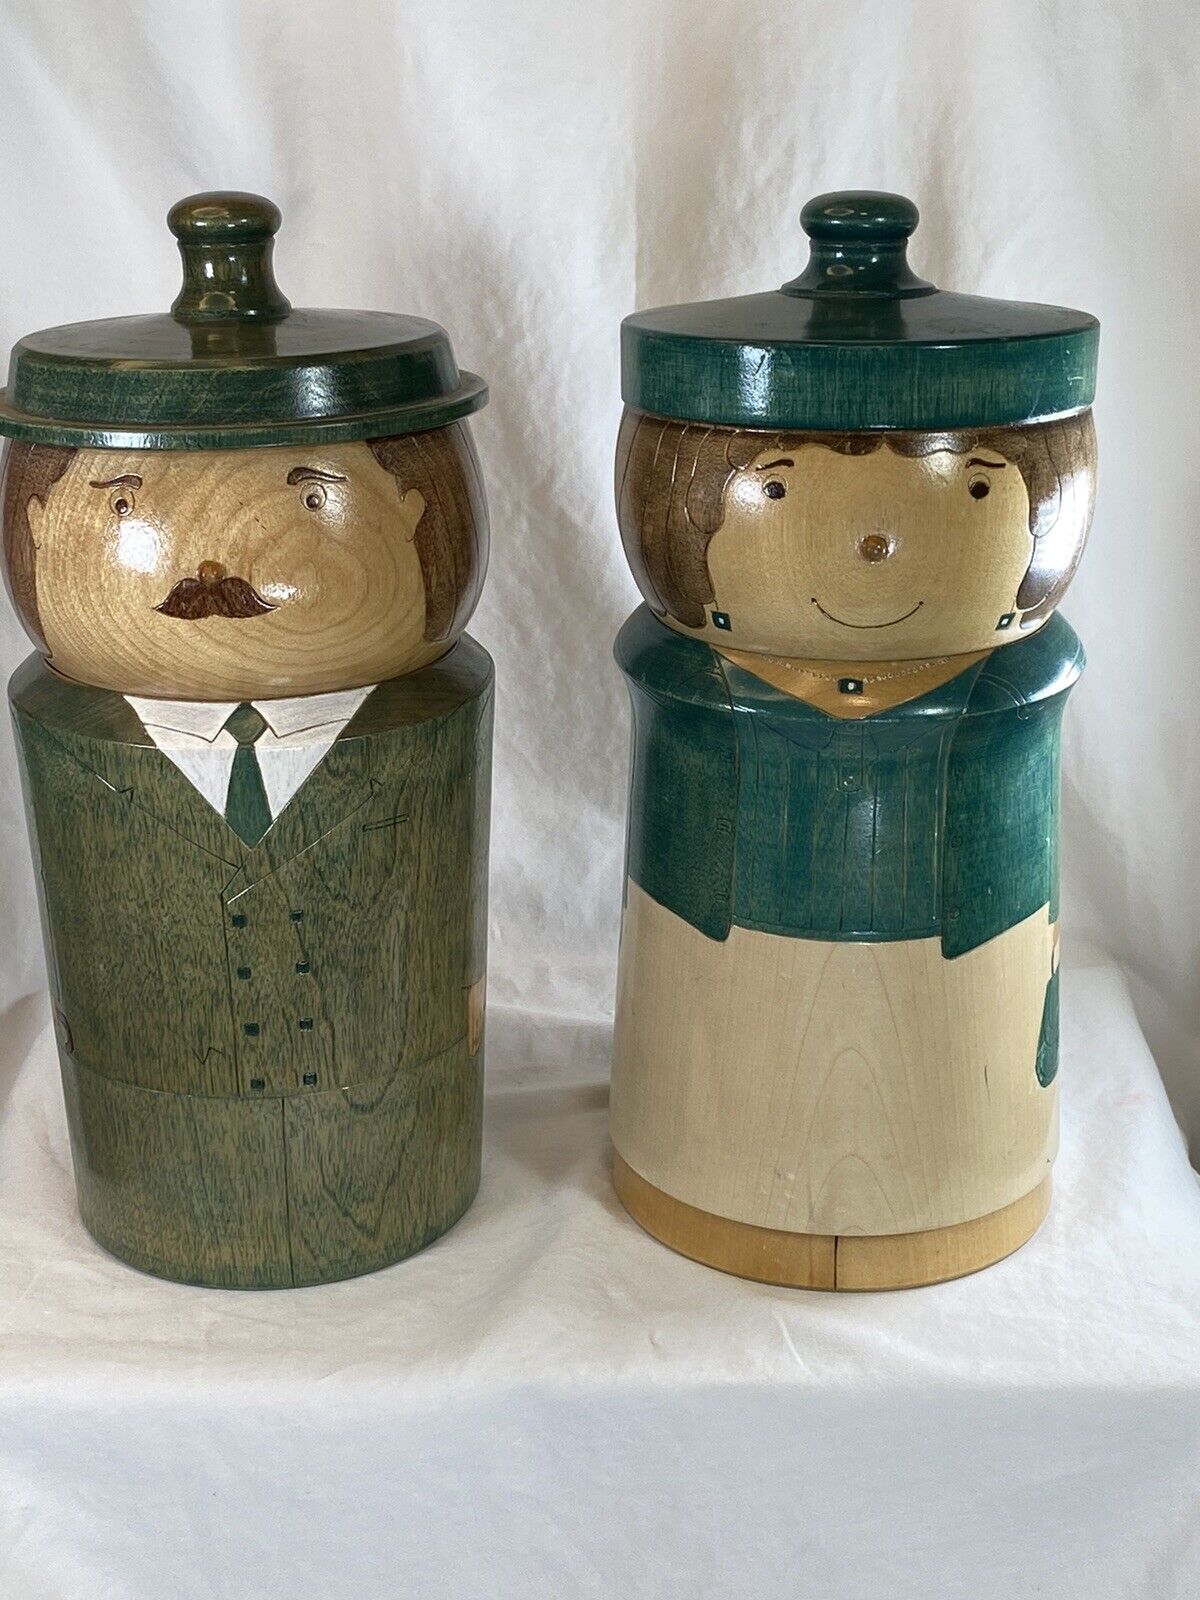 Wonderful Vintage Hand Made Round Wooden Containers/Canisters Man & Woman Signed